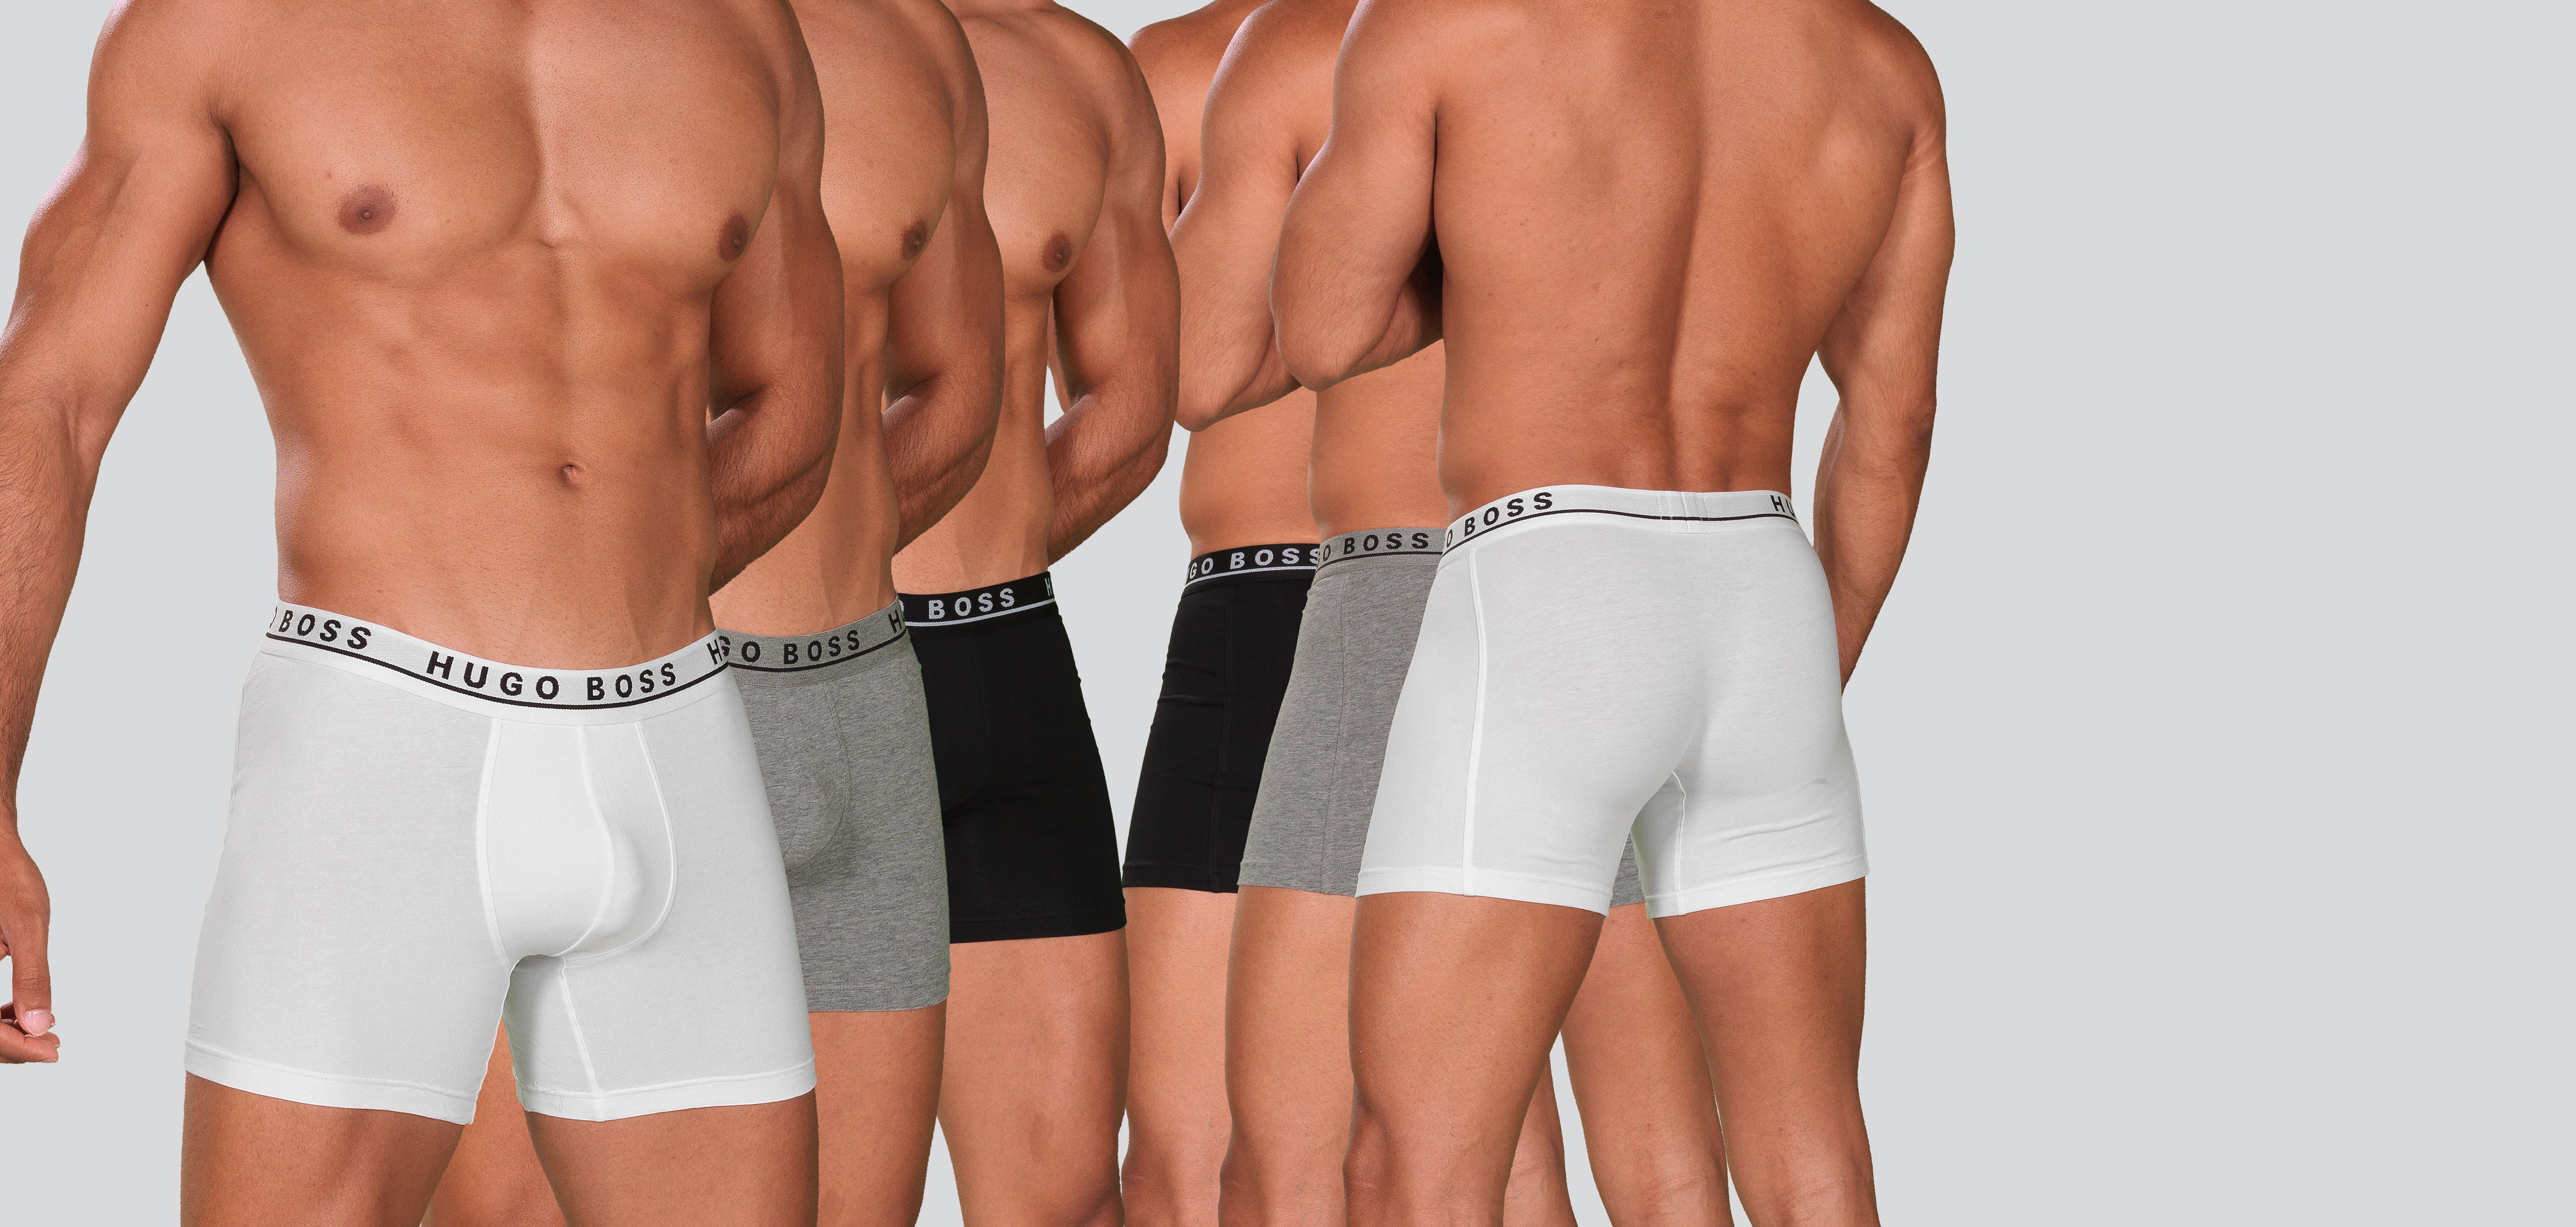 Boss Boxer Brief 3-Pack 404